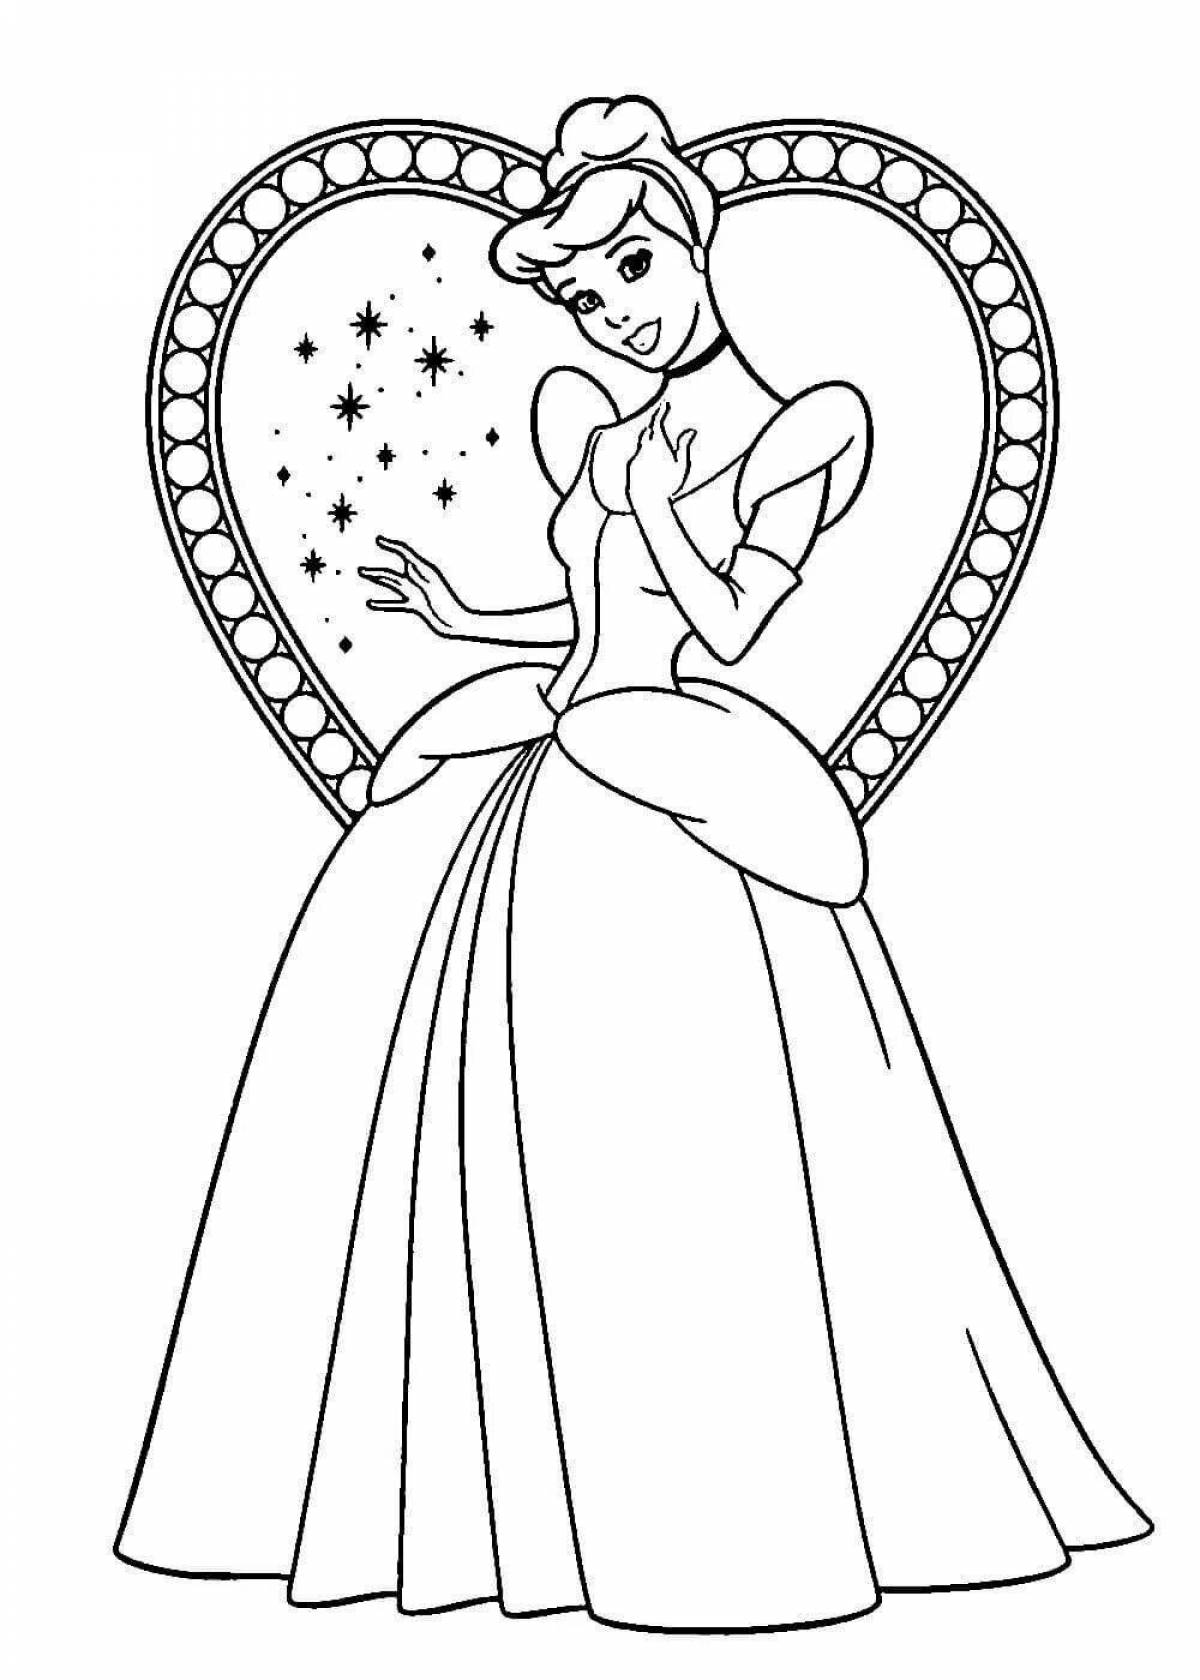 Charming Cinderella coloring book for children 4-5 years old